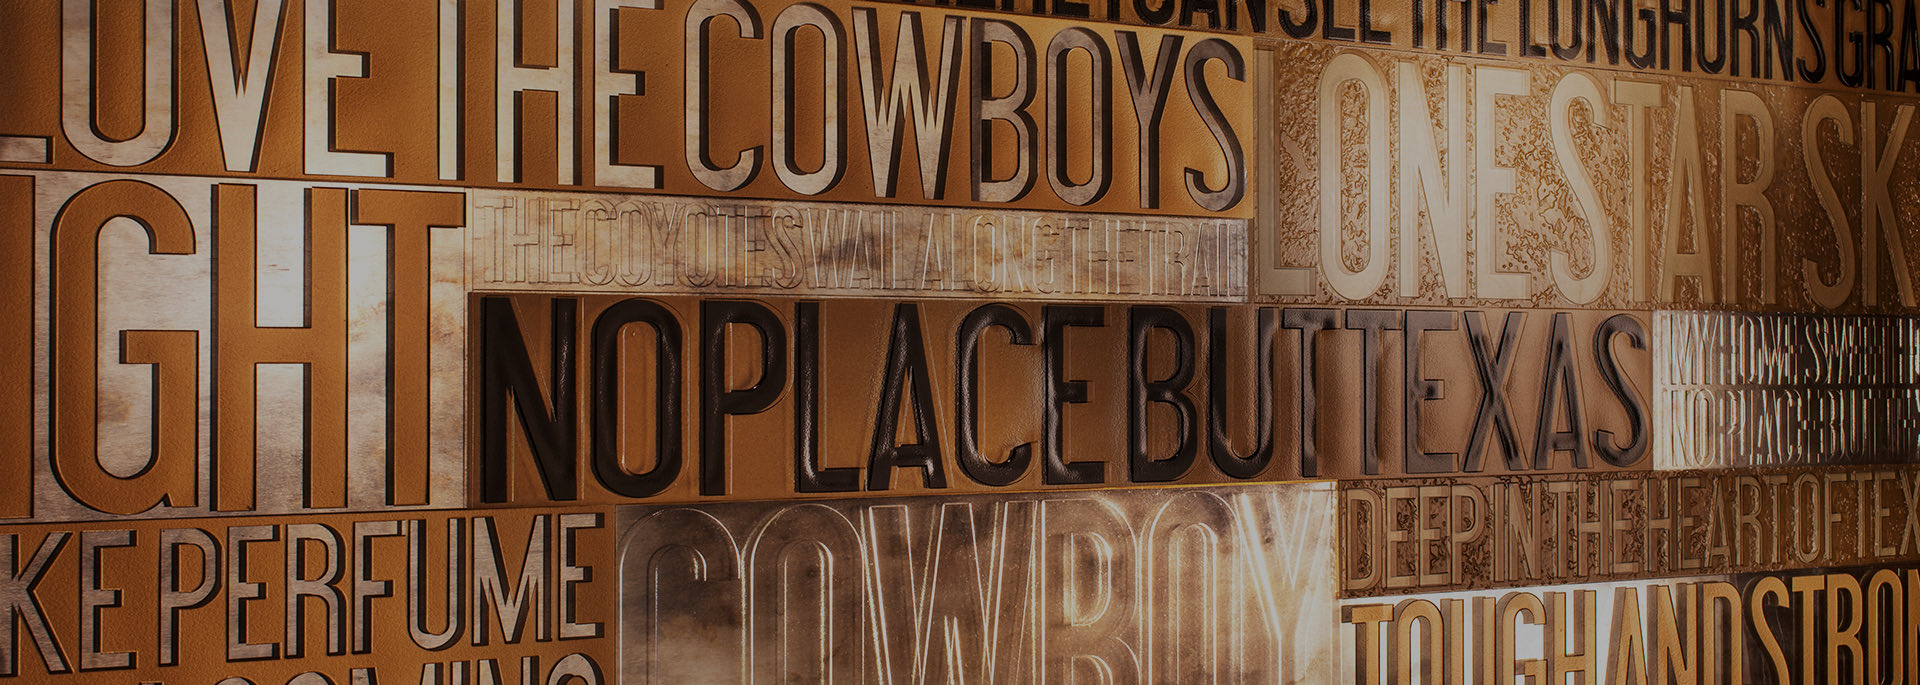 closeup view of a sign that says cowboys